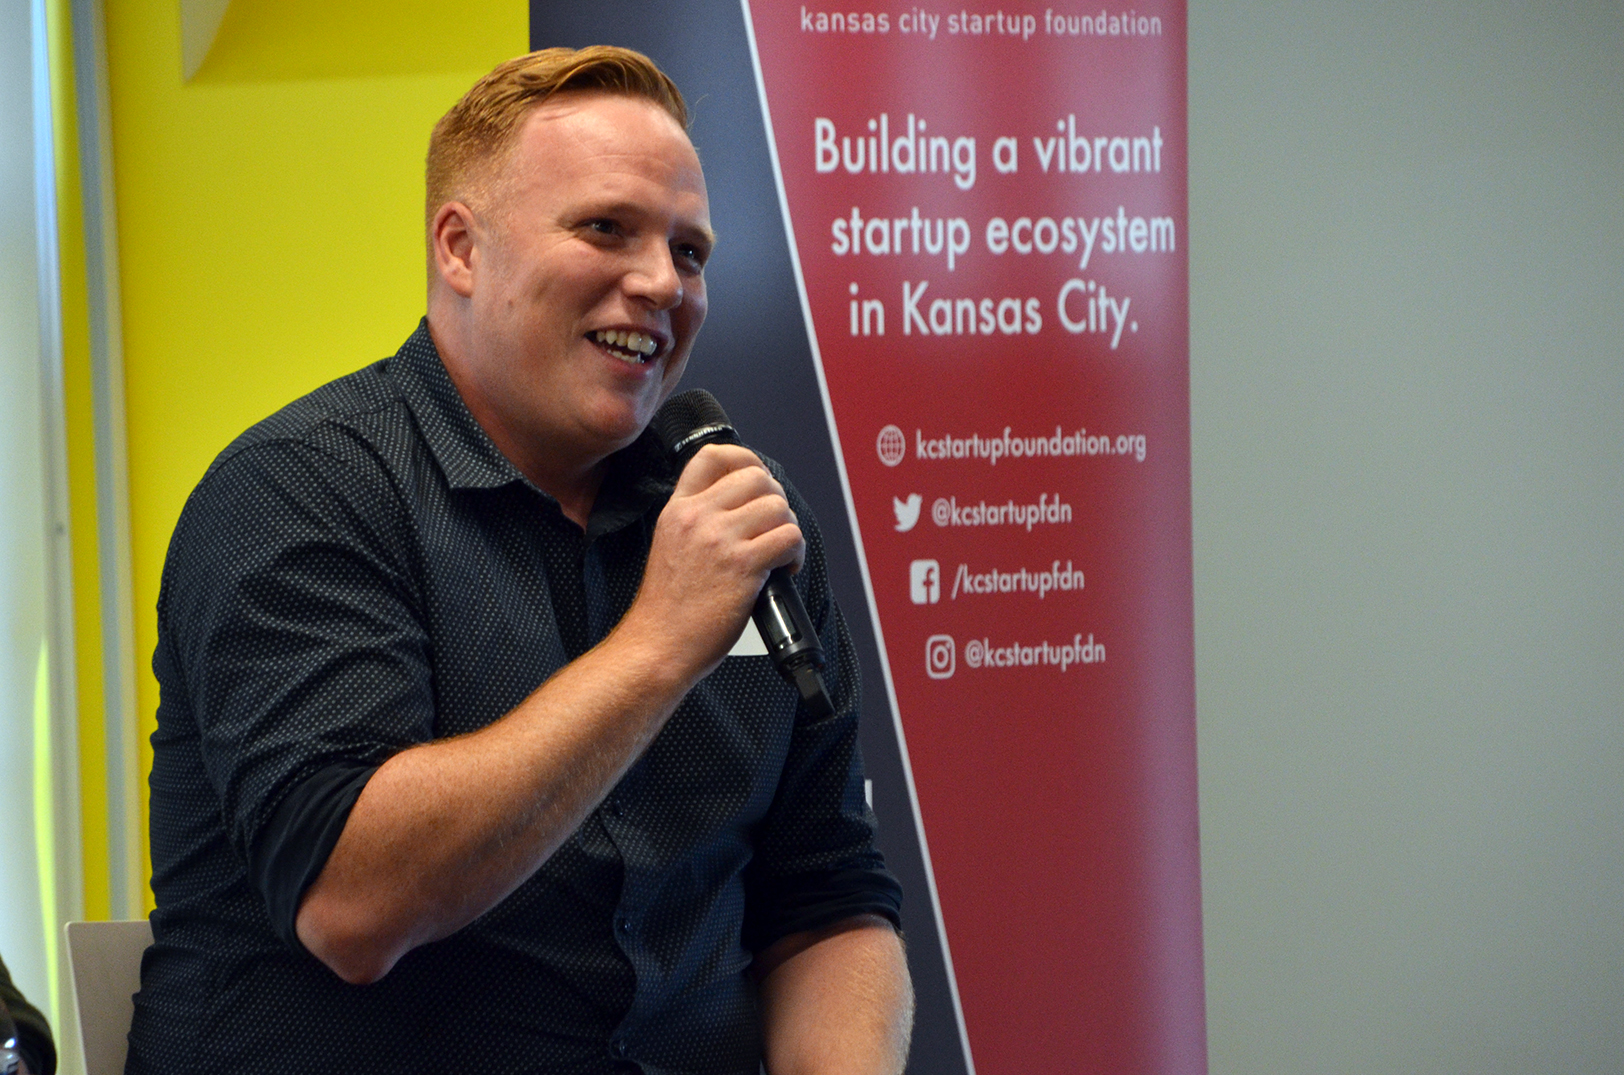 Emerging from failure: Doughnut Lounge founder gets raw among startup peers (IXKC photos)